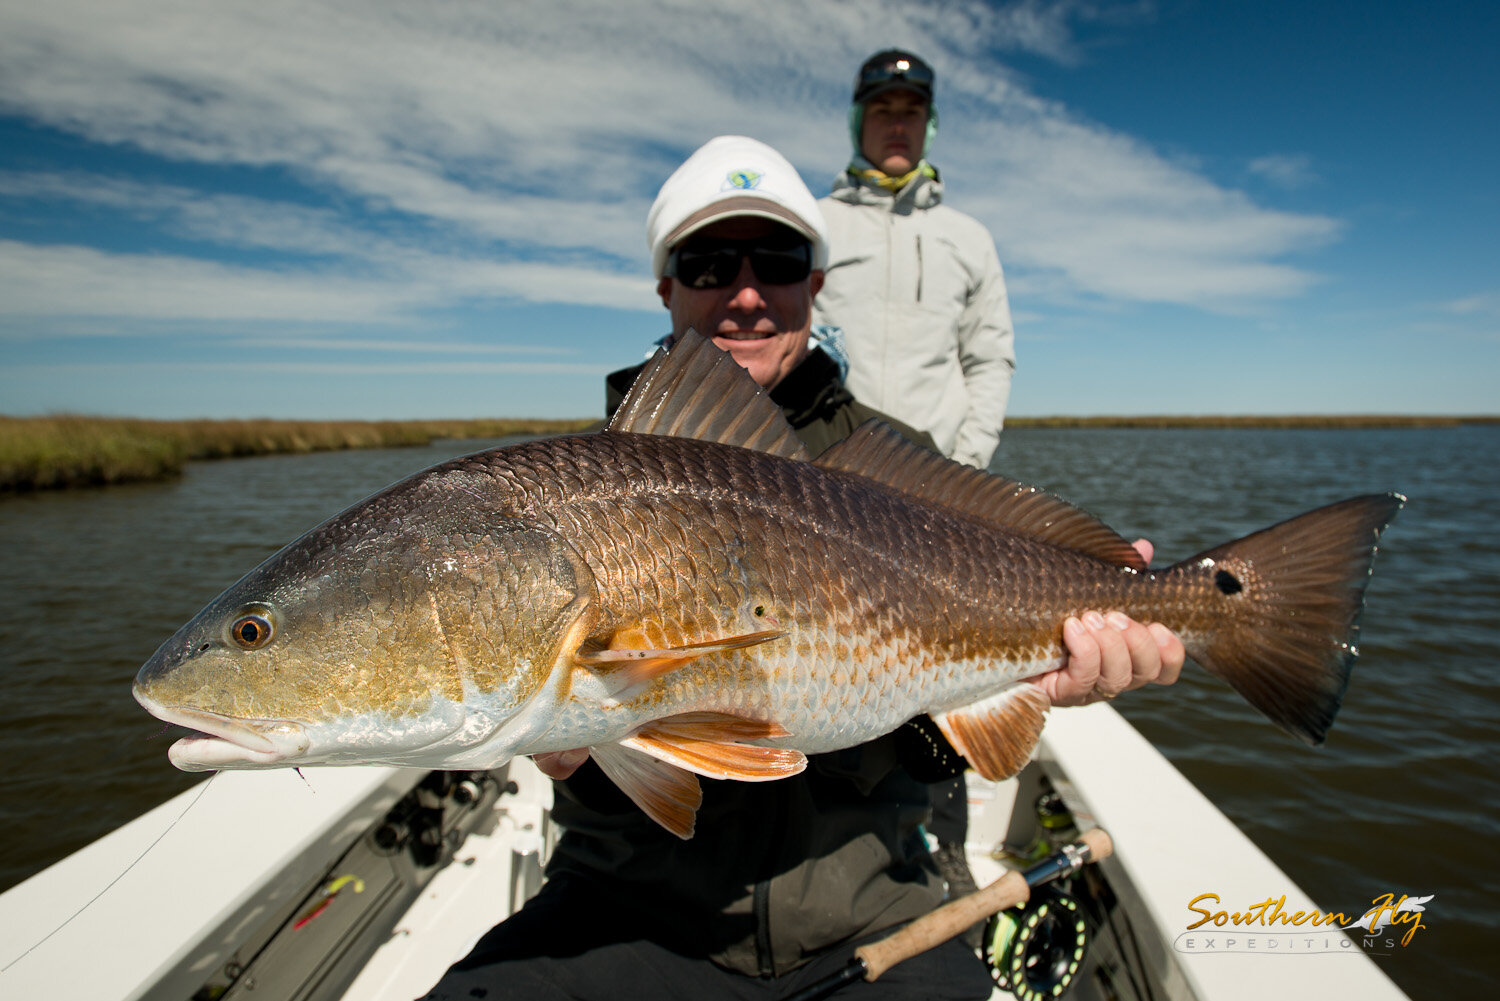 2019-11-01-02_SouthernFlyExpeditions_NewOrleans_BradSparling-7.jpg